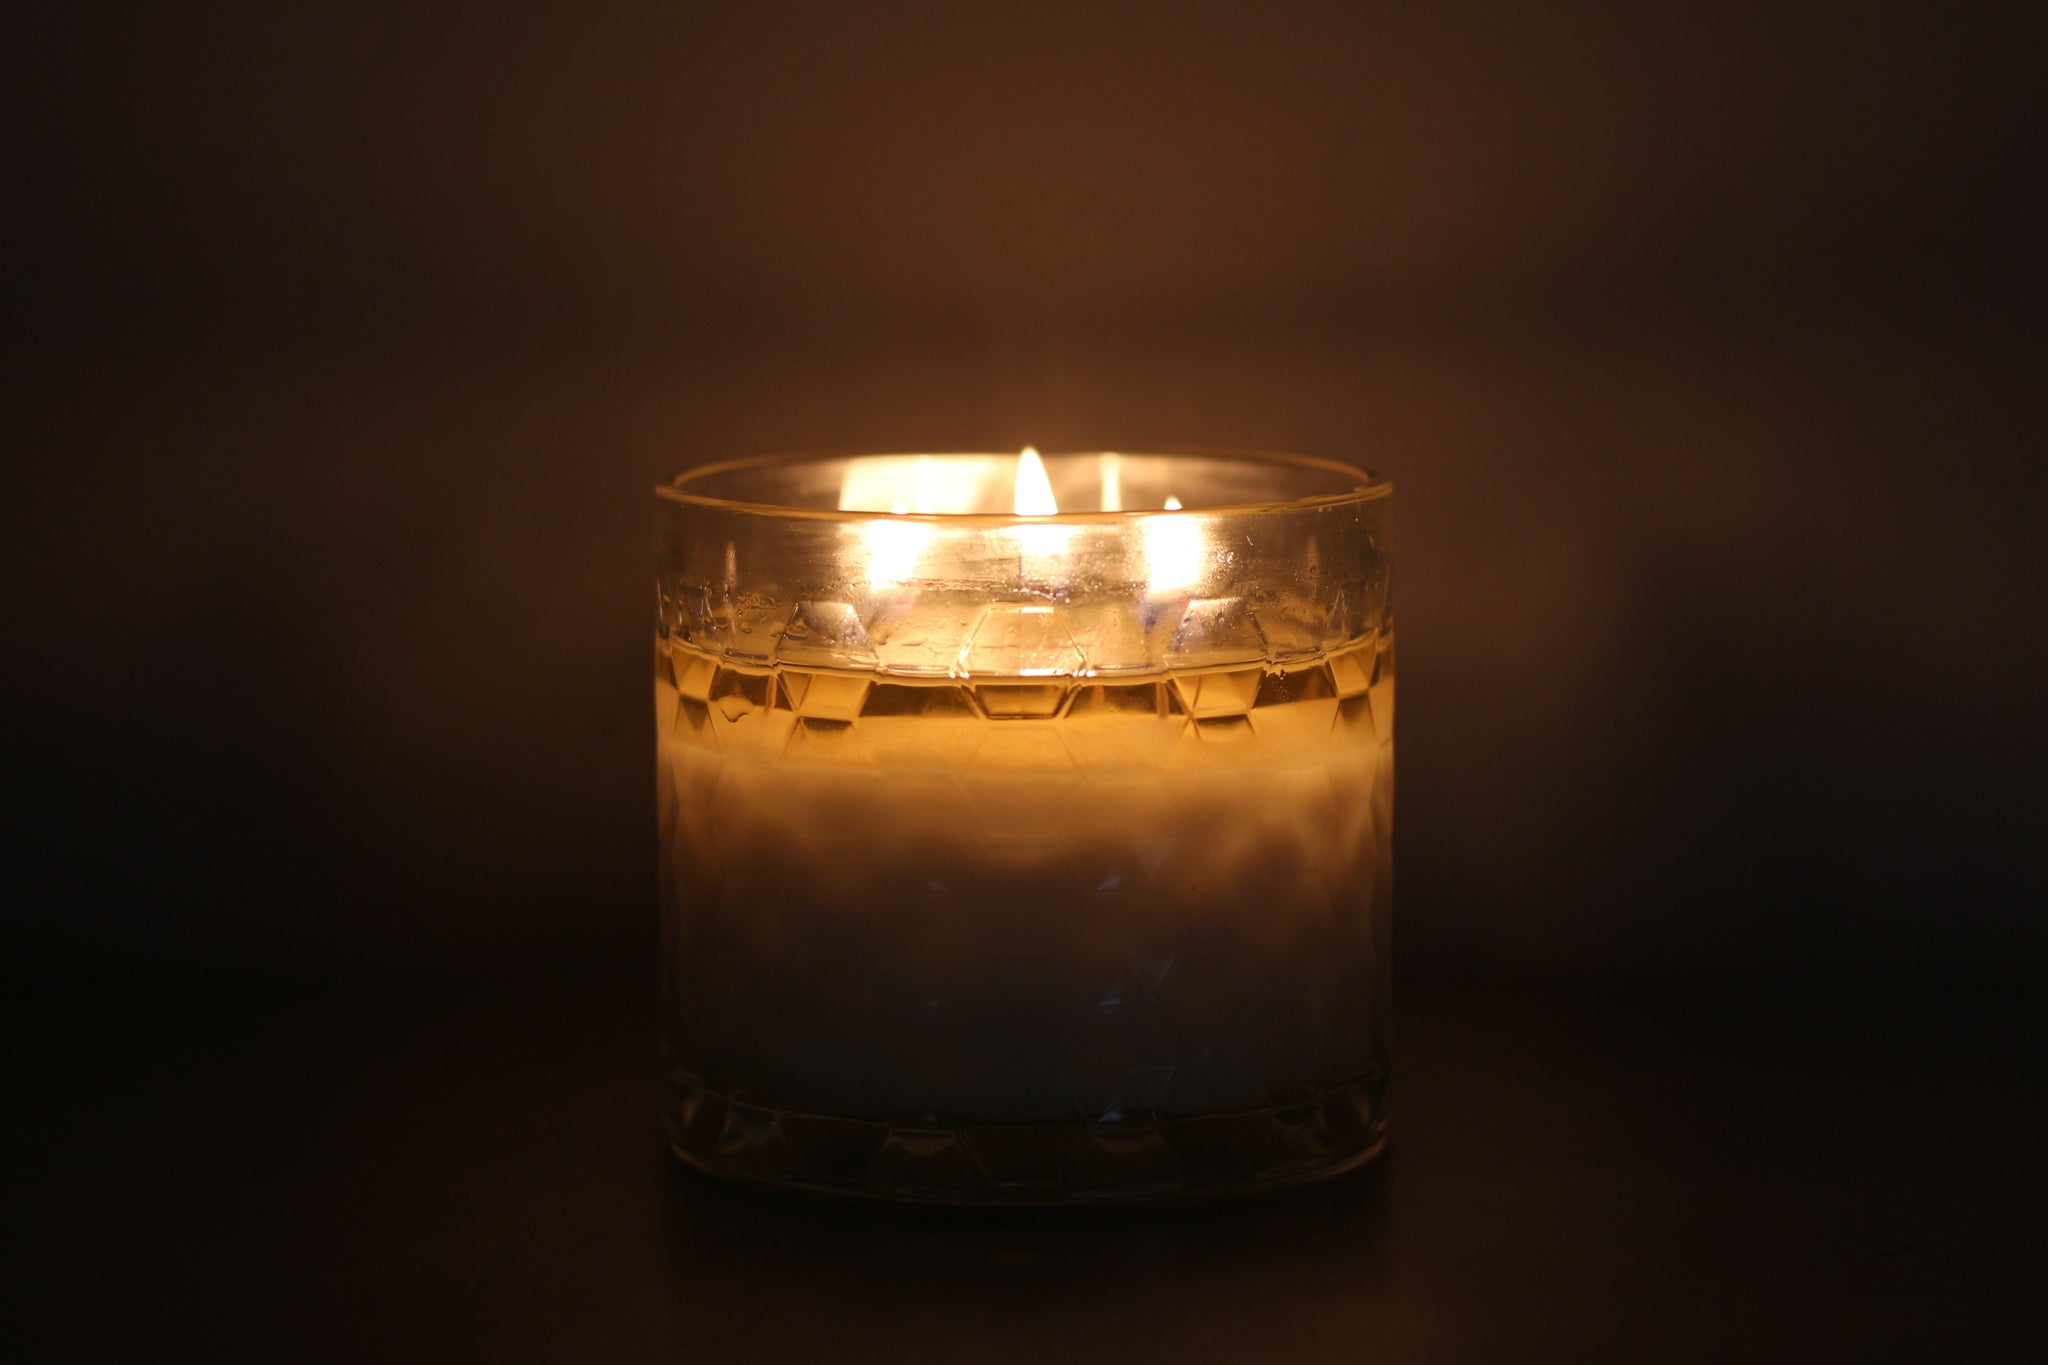 Ocean Rose | Handpoured 3-Wick Soy Wax Candle